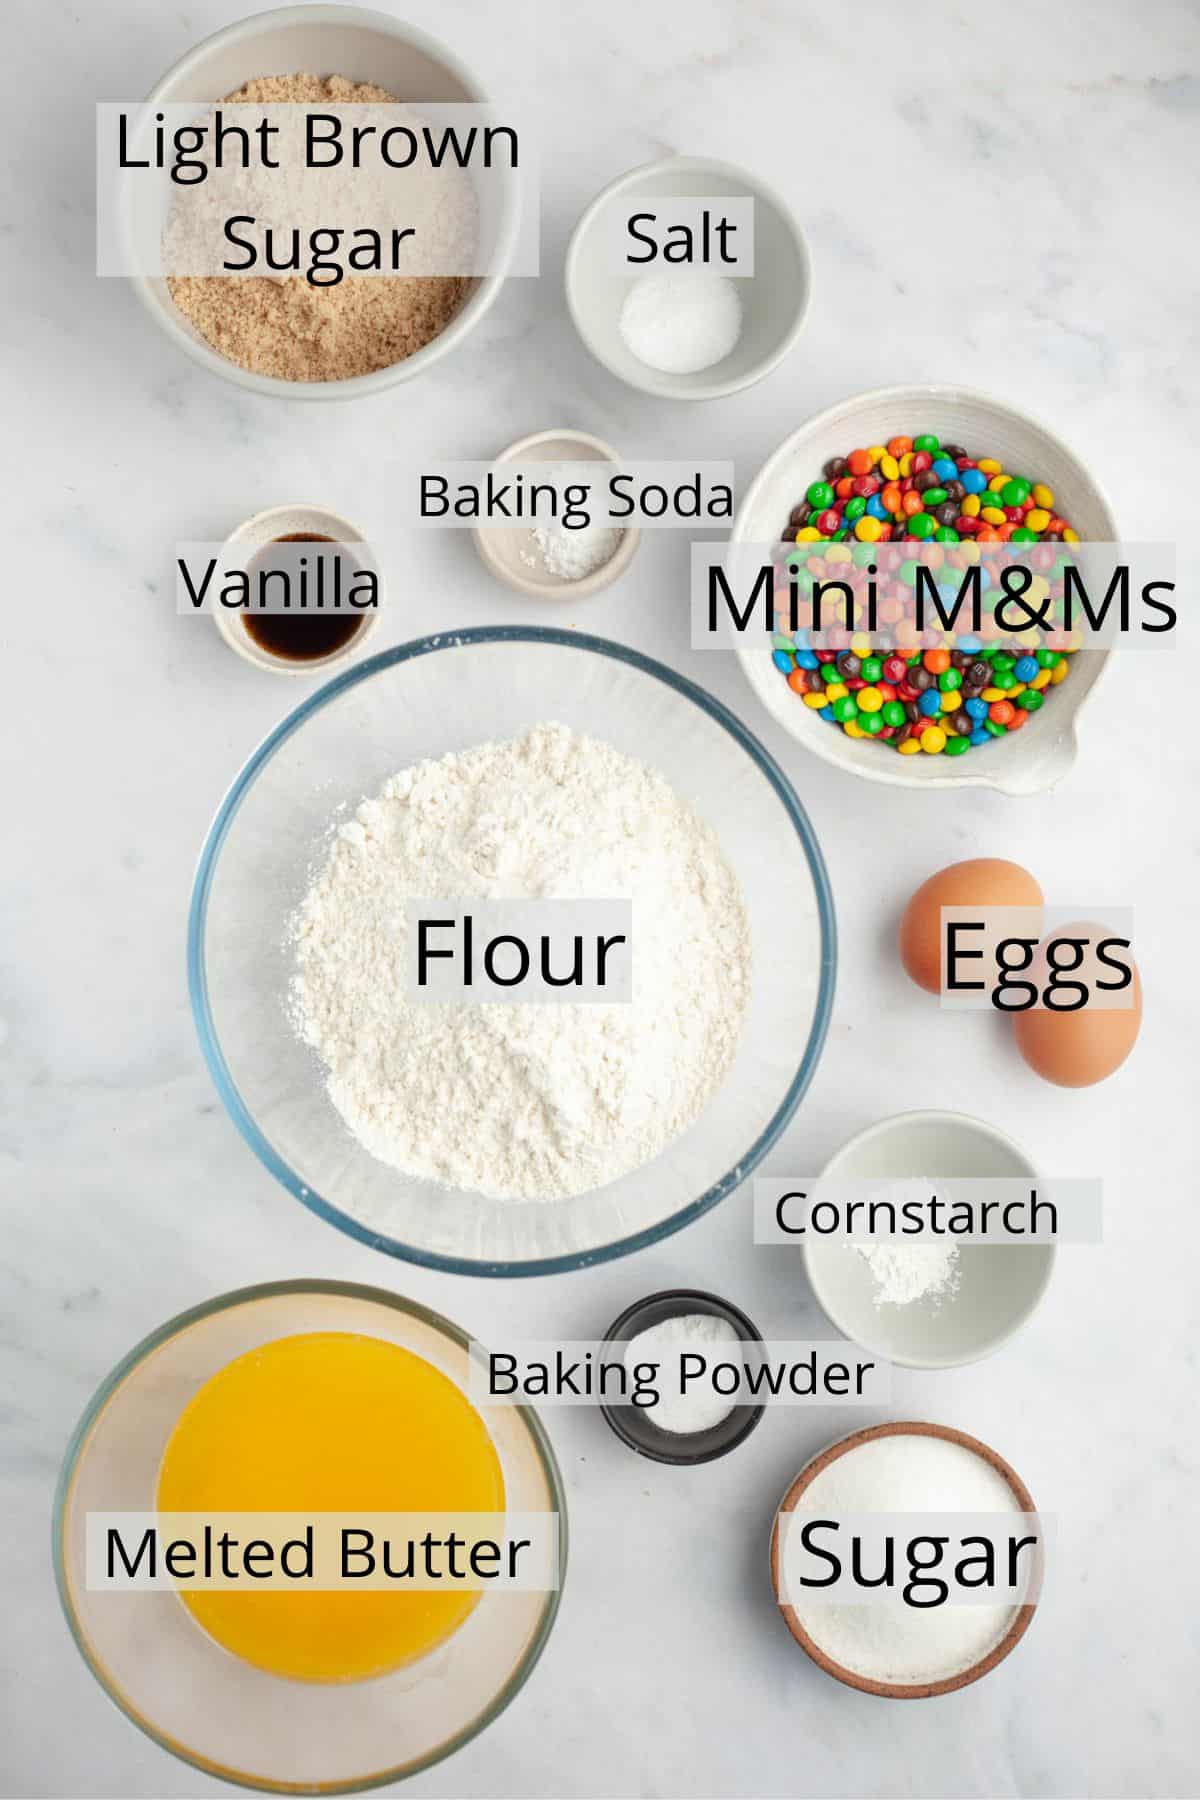 All the ingredients needed to make mini m&m cookies weighed out into small bowls.